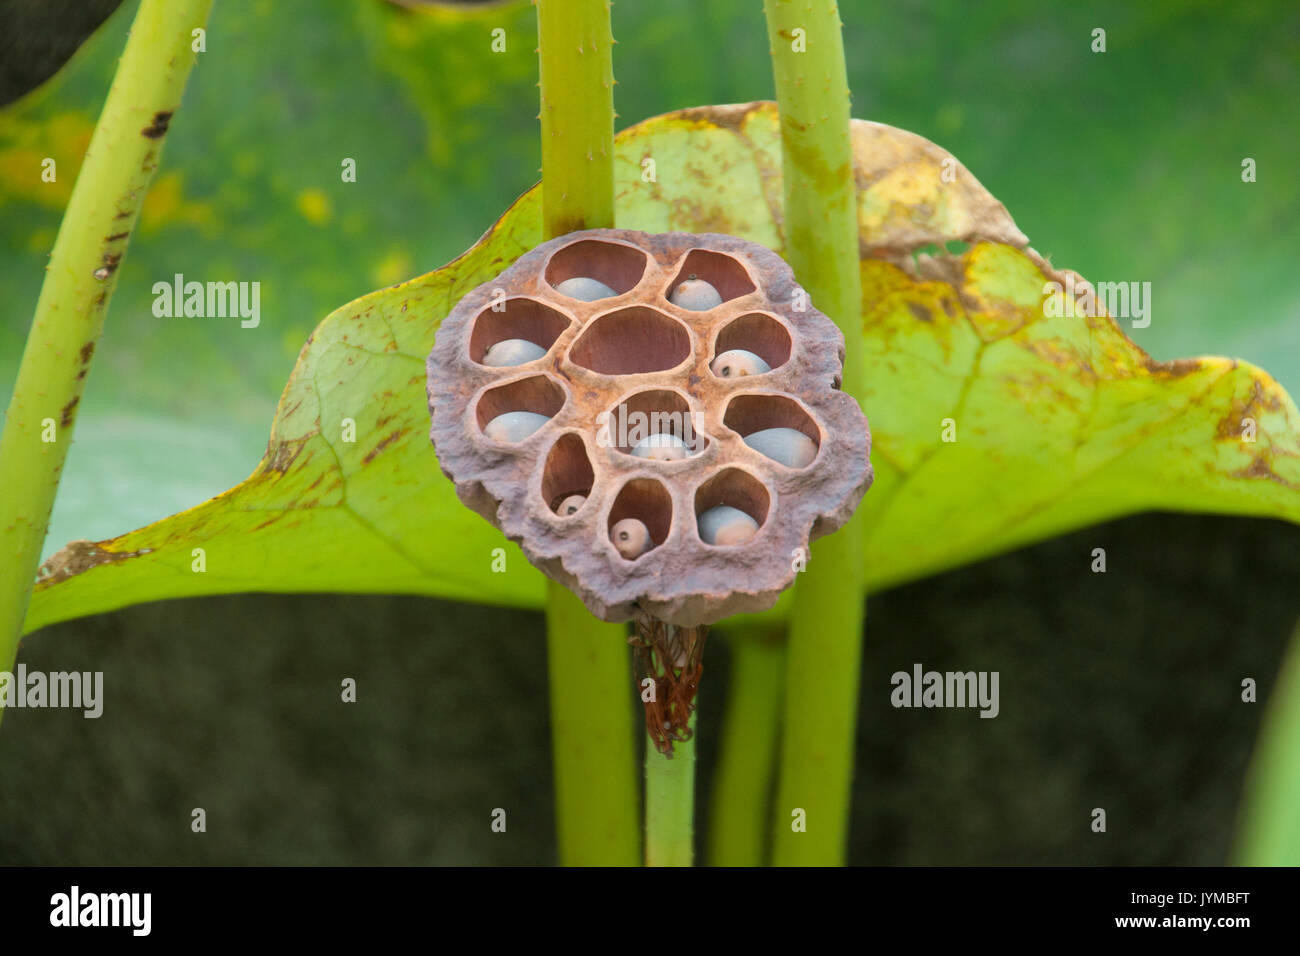 seed pods of the lotus flower Stock Photo